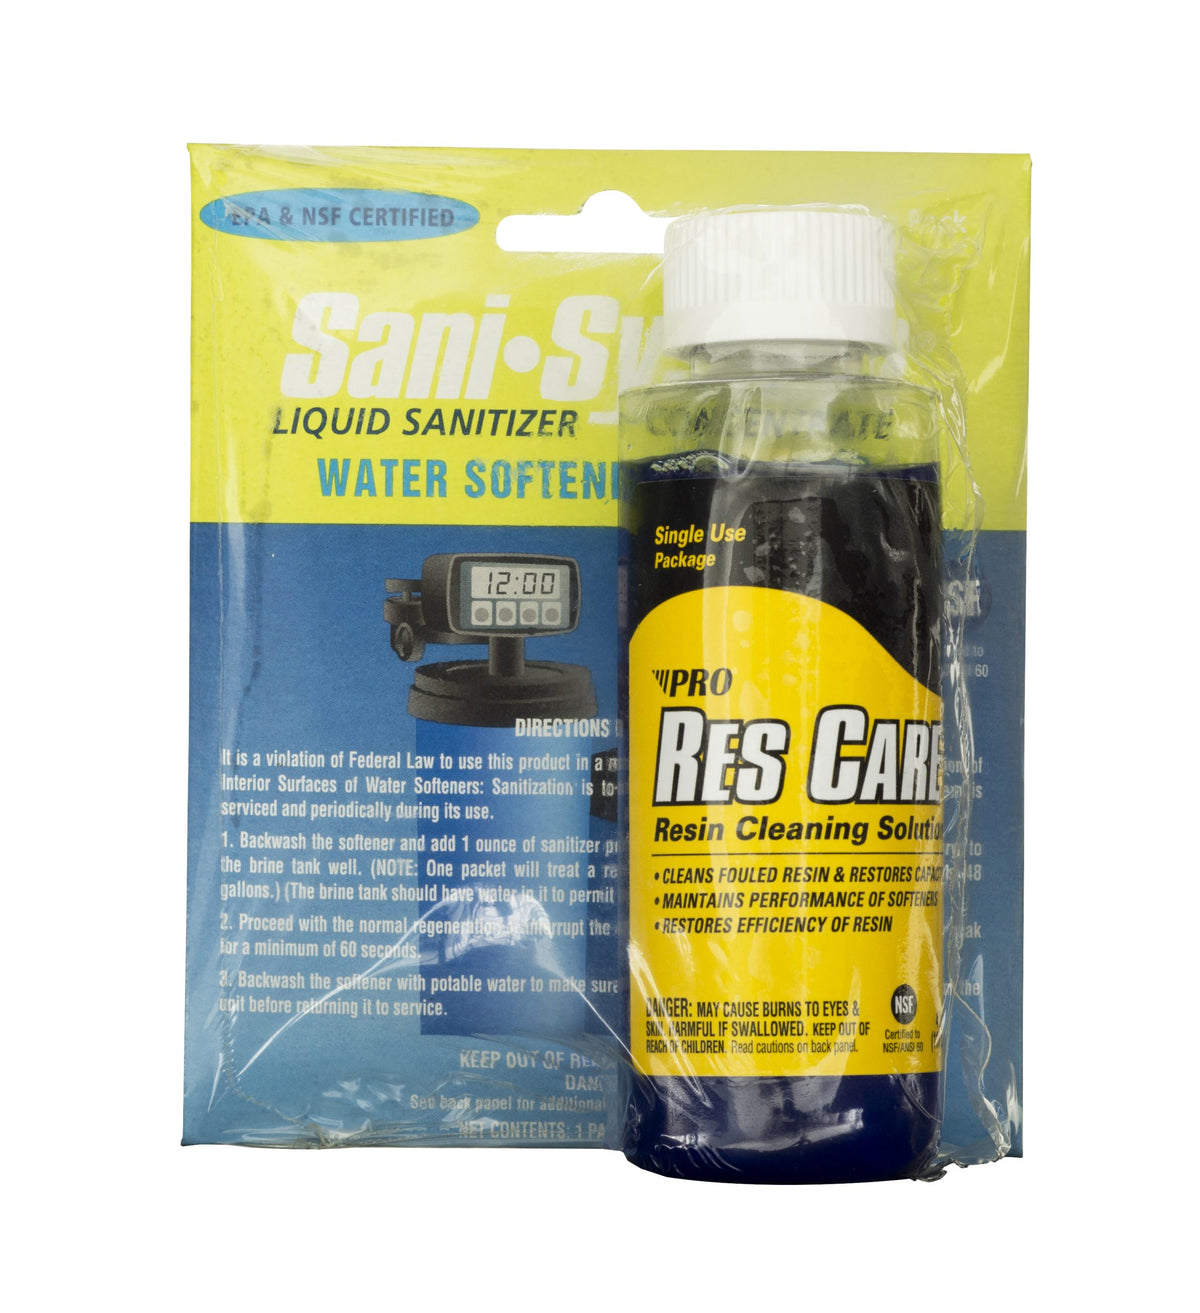 RES-UP WATER SOFTENER RESIN CLEANING SOLUTION RESIN CLEANER